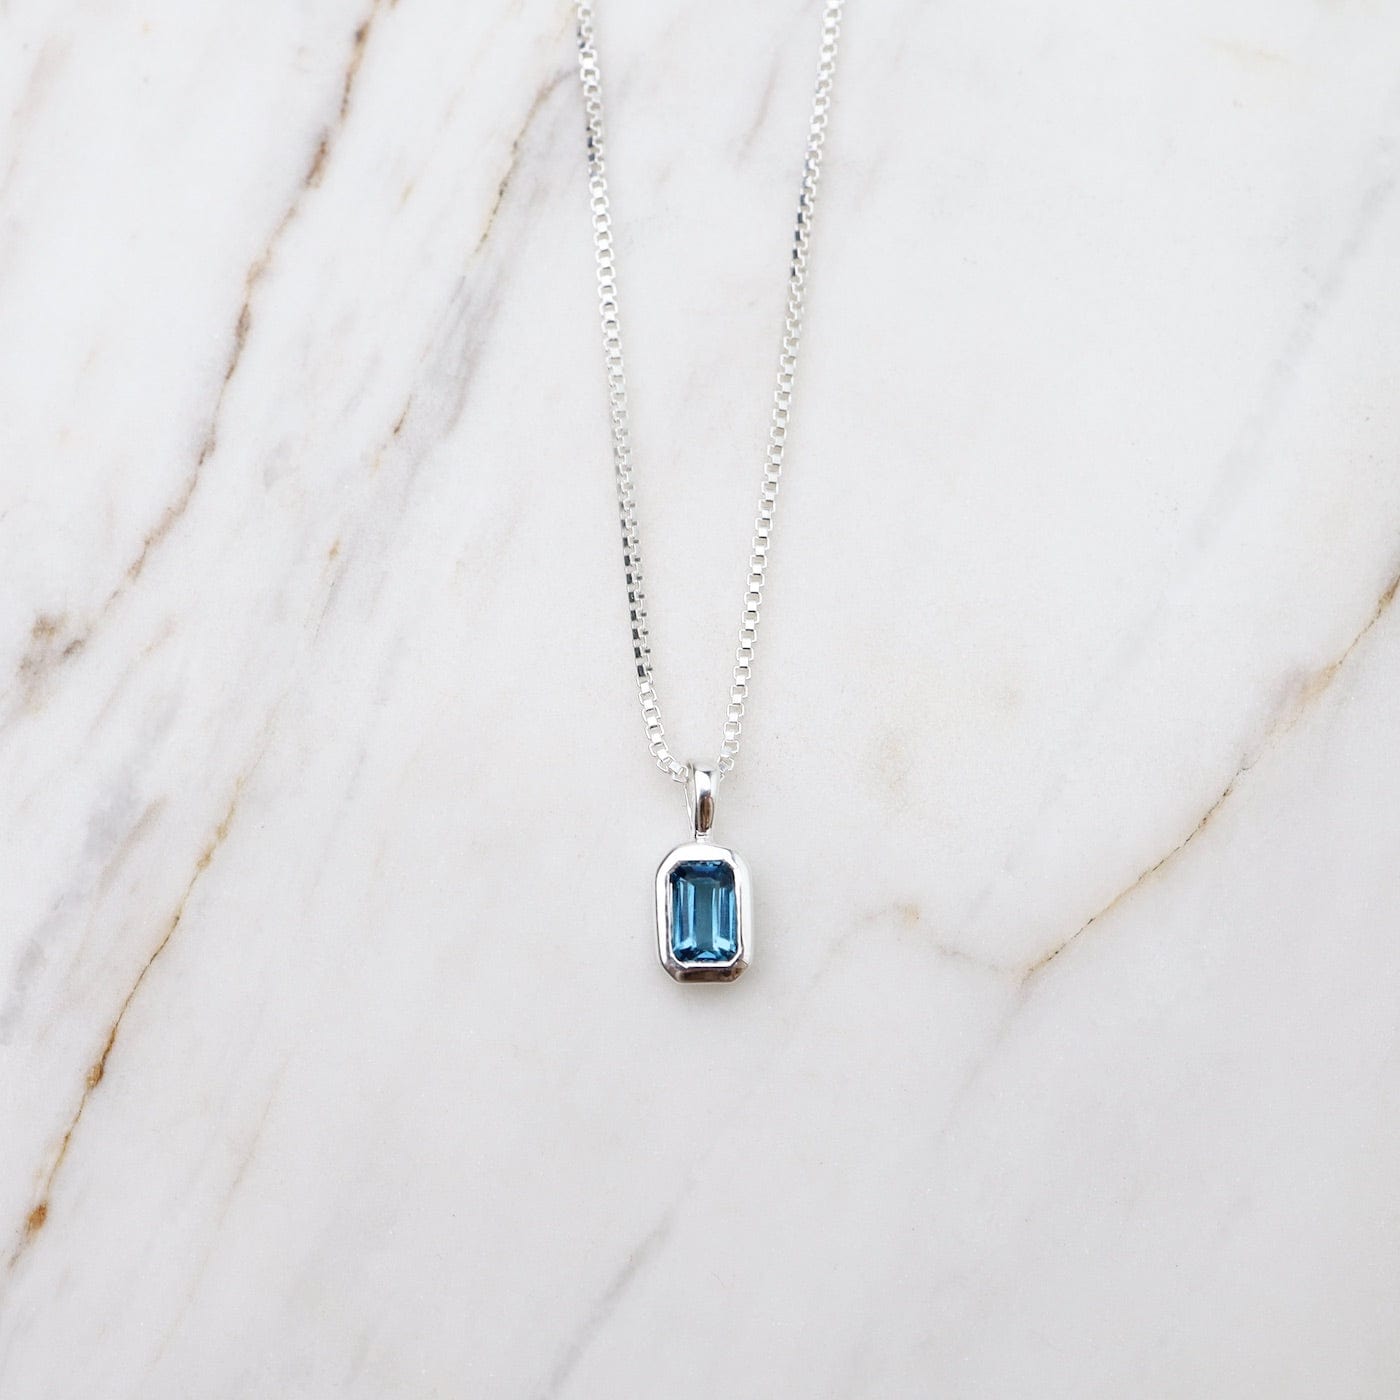 925 Sterling Silver Pendant Necklace 4MM Square London Blue Topaz and  accent white cubic zirconia at Rs 1775.63 | सिल्वर जेमस्टोन पेंडेंट in  Jaipur | ID: 2850159558733